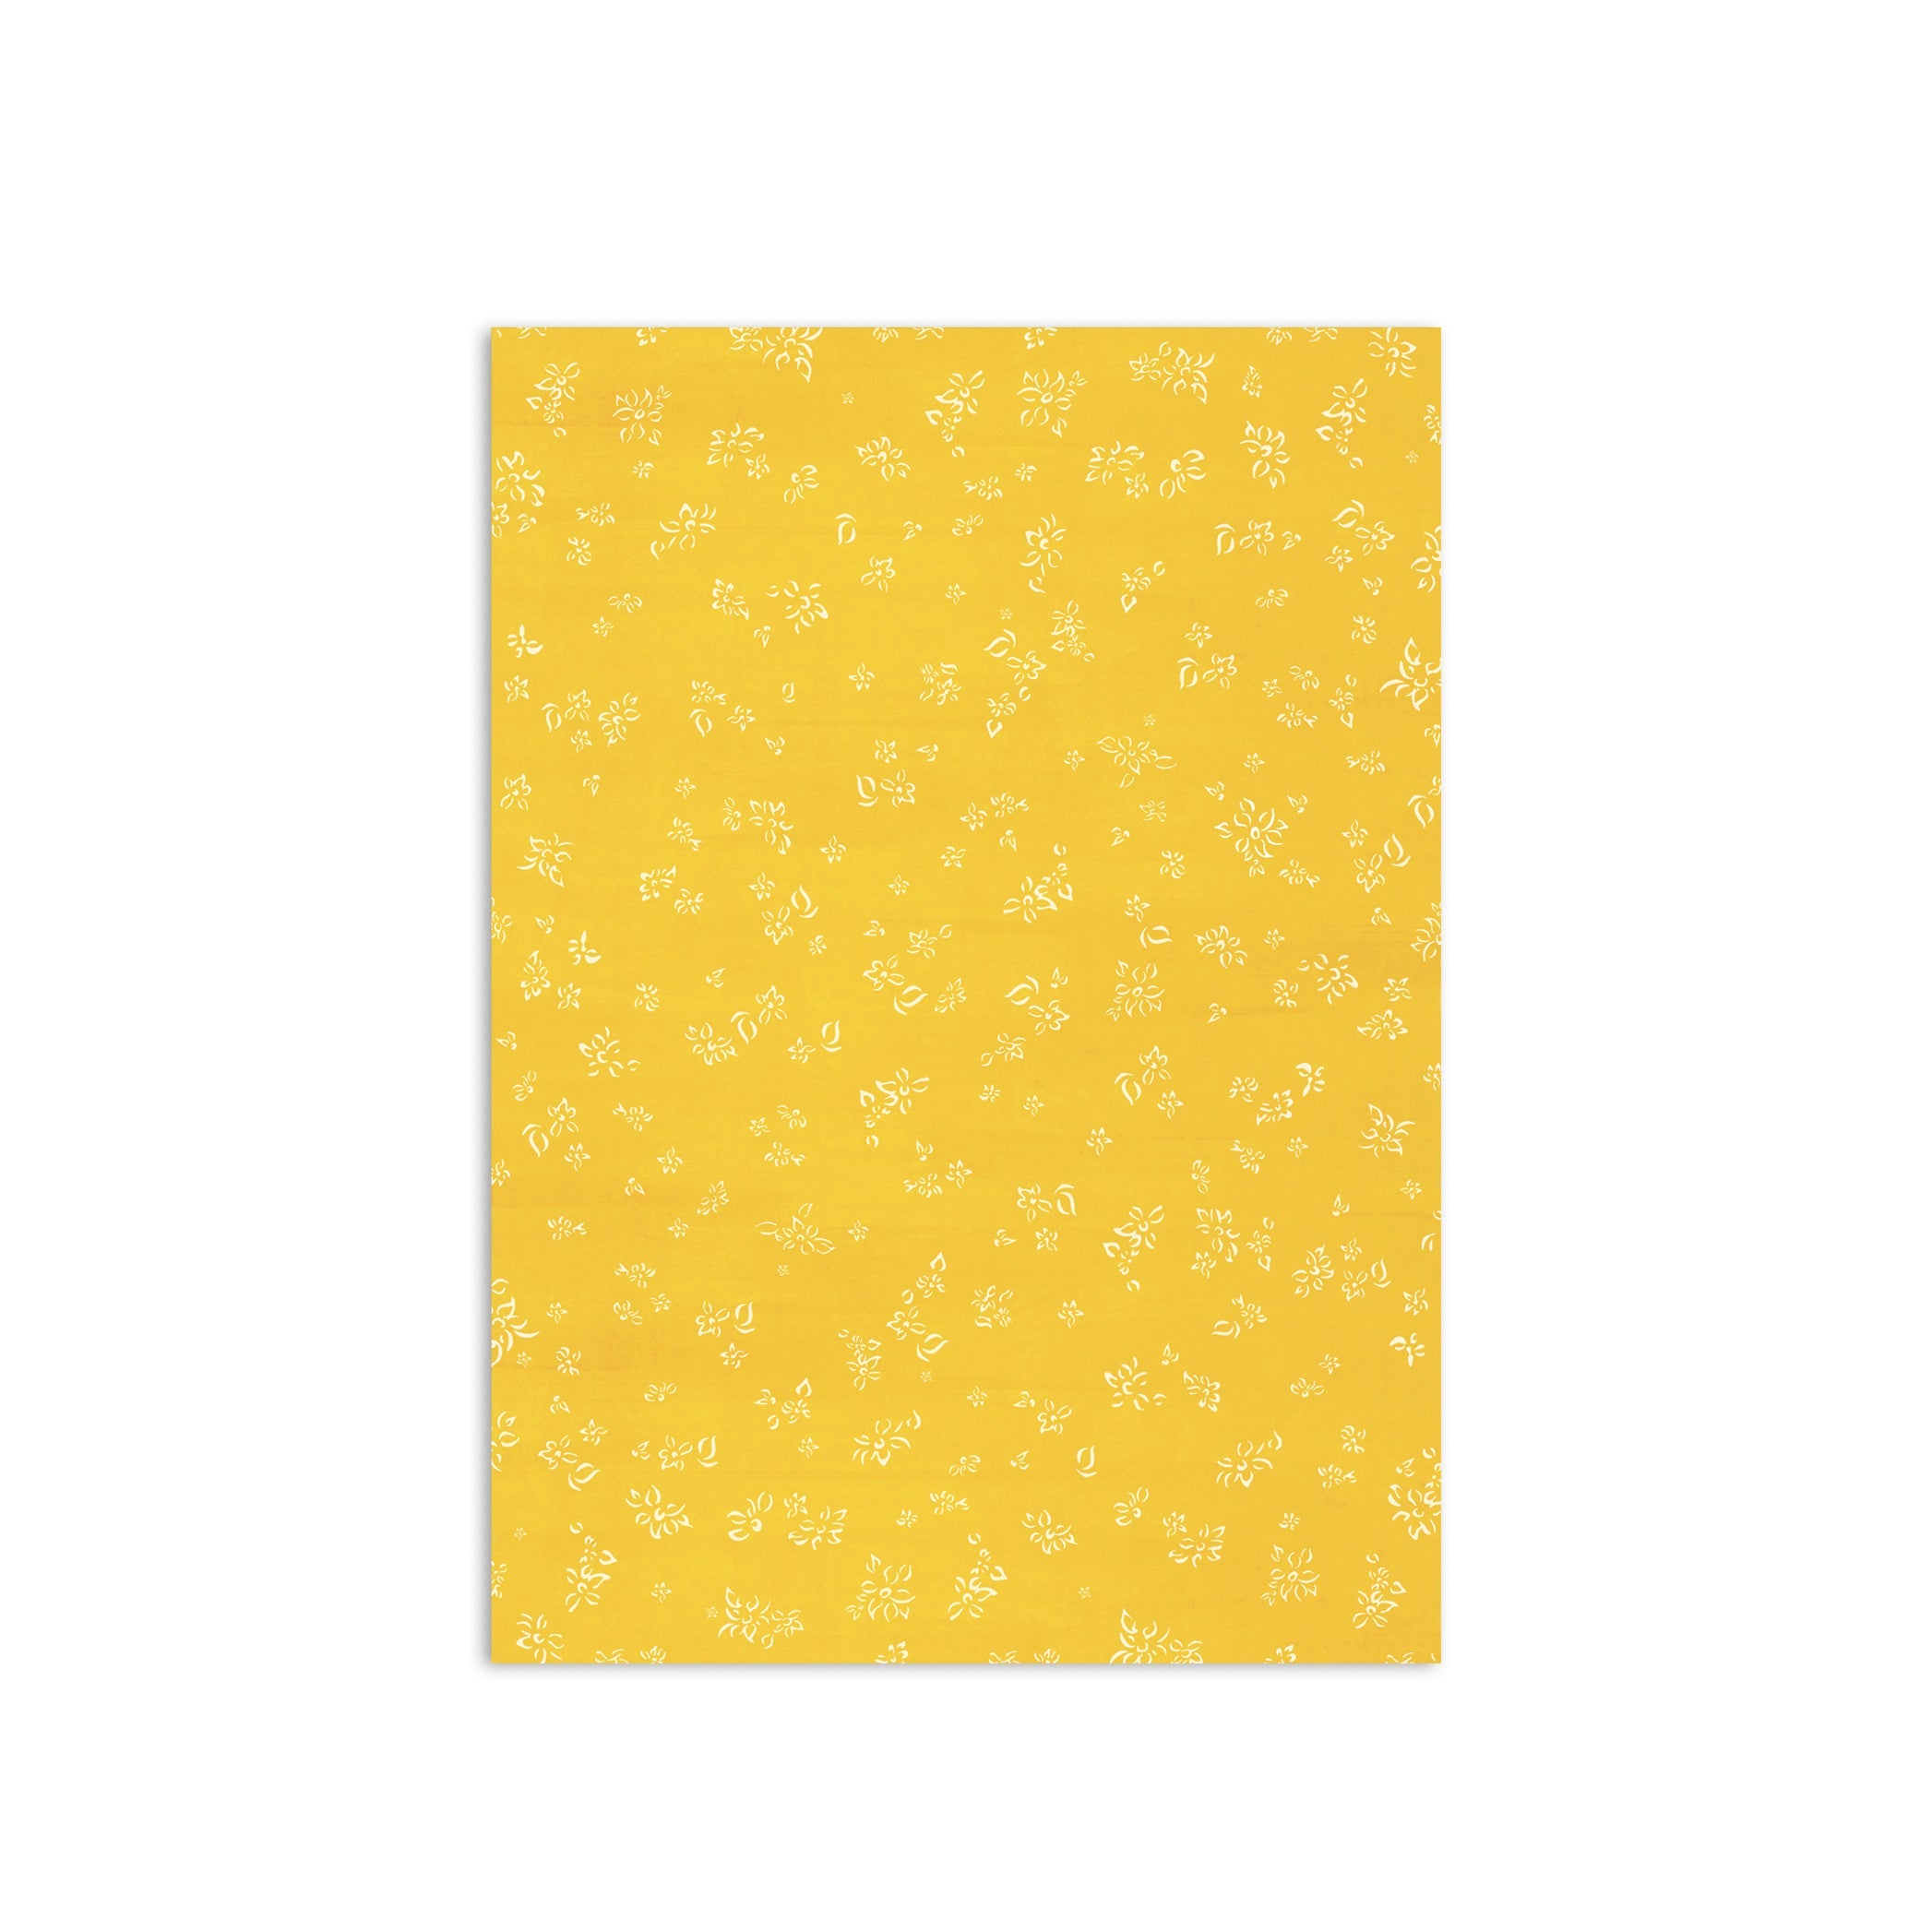 Summerill & Bishop Falling Flower Wrapping Paper in Lemon Yellow, Roll of 4